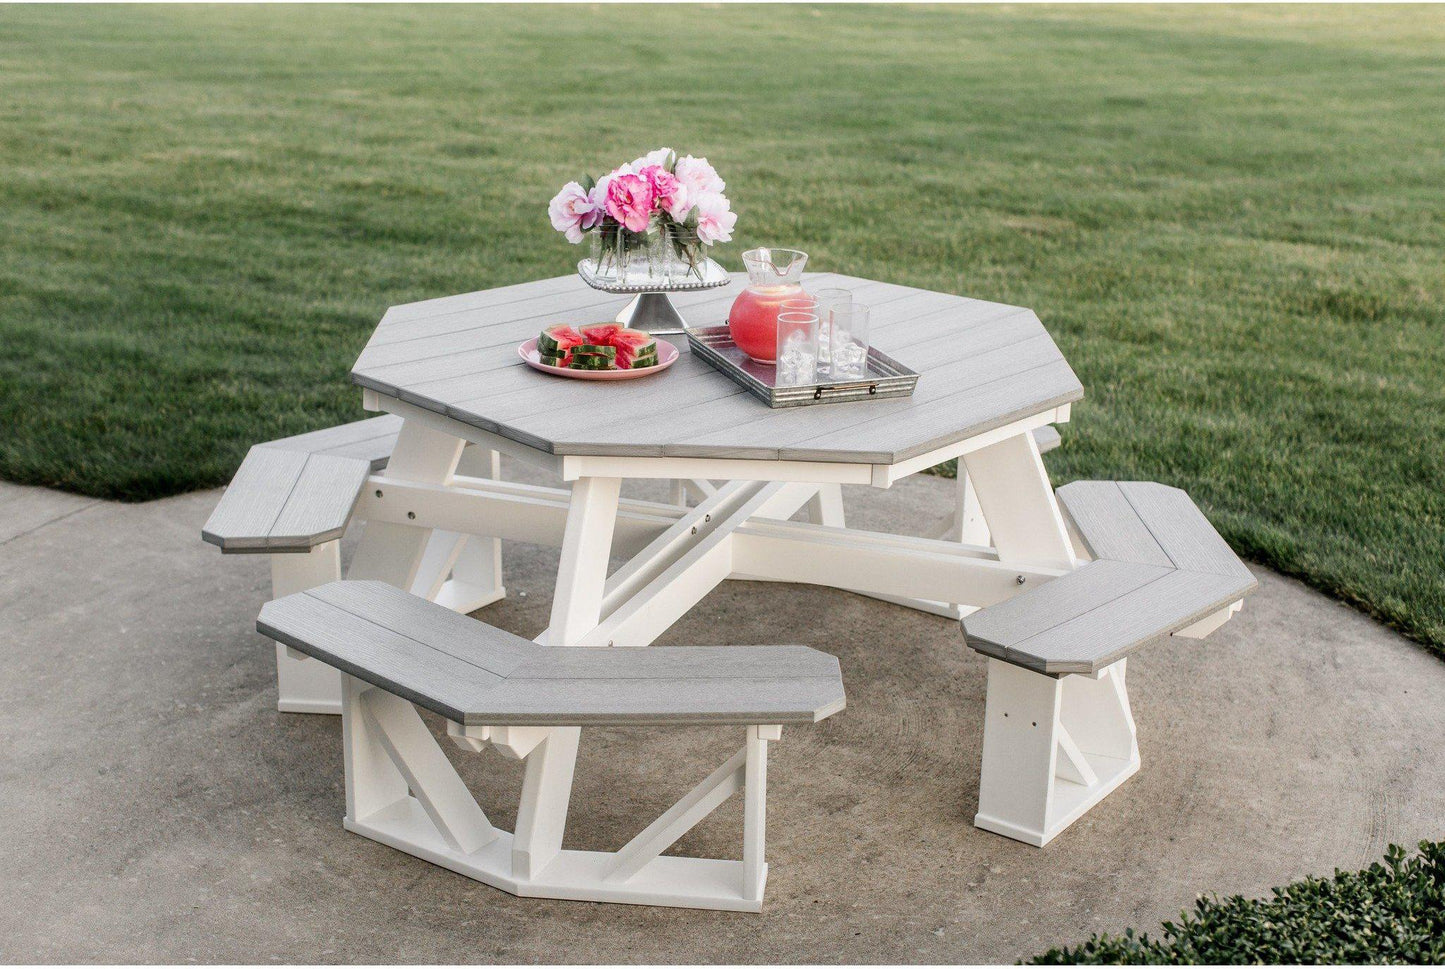 Wildridge Recycled Plastic 55" Octagon Picnic Table - LEAD TIME TO SHIP 6 WEEKS OR LESS